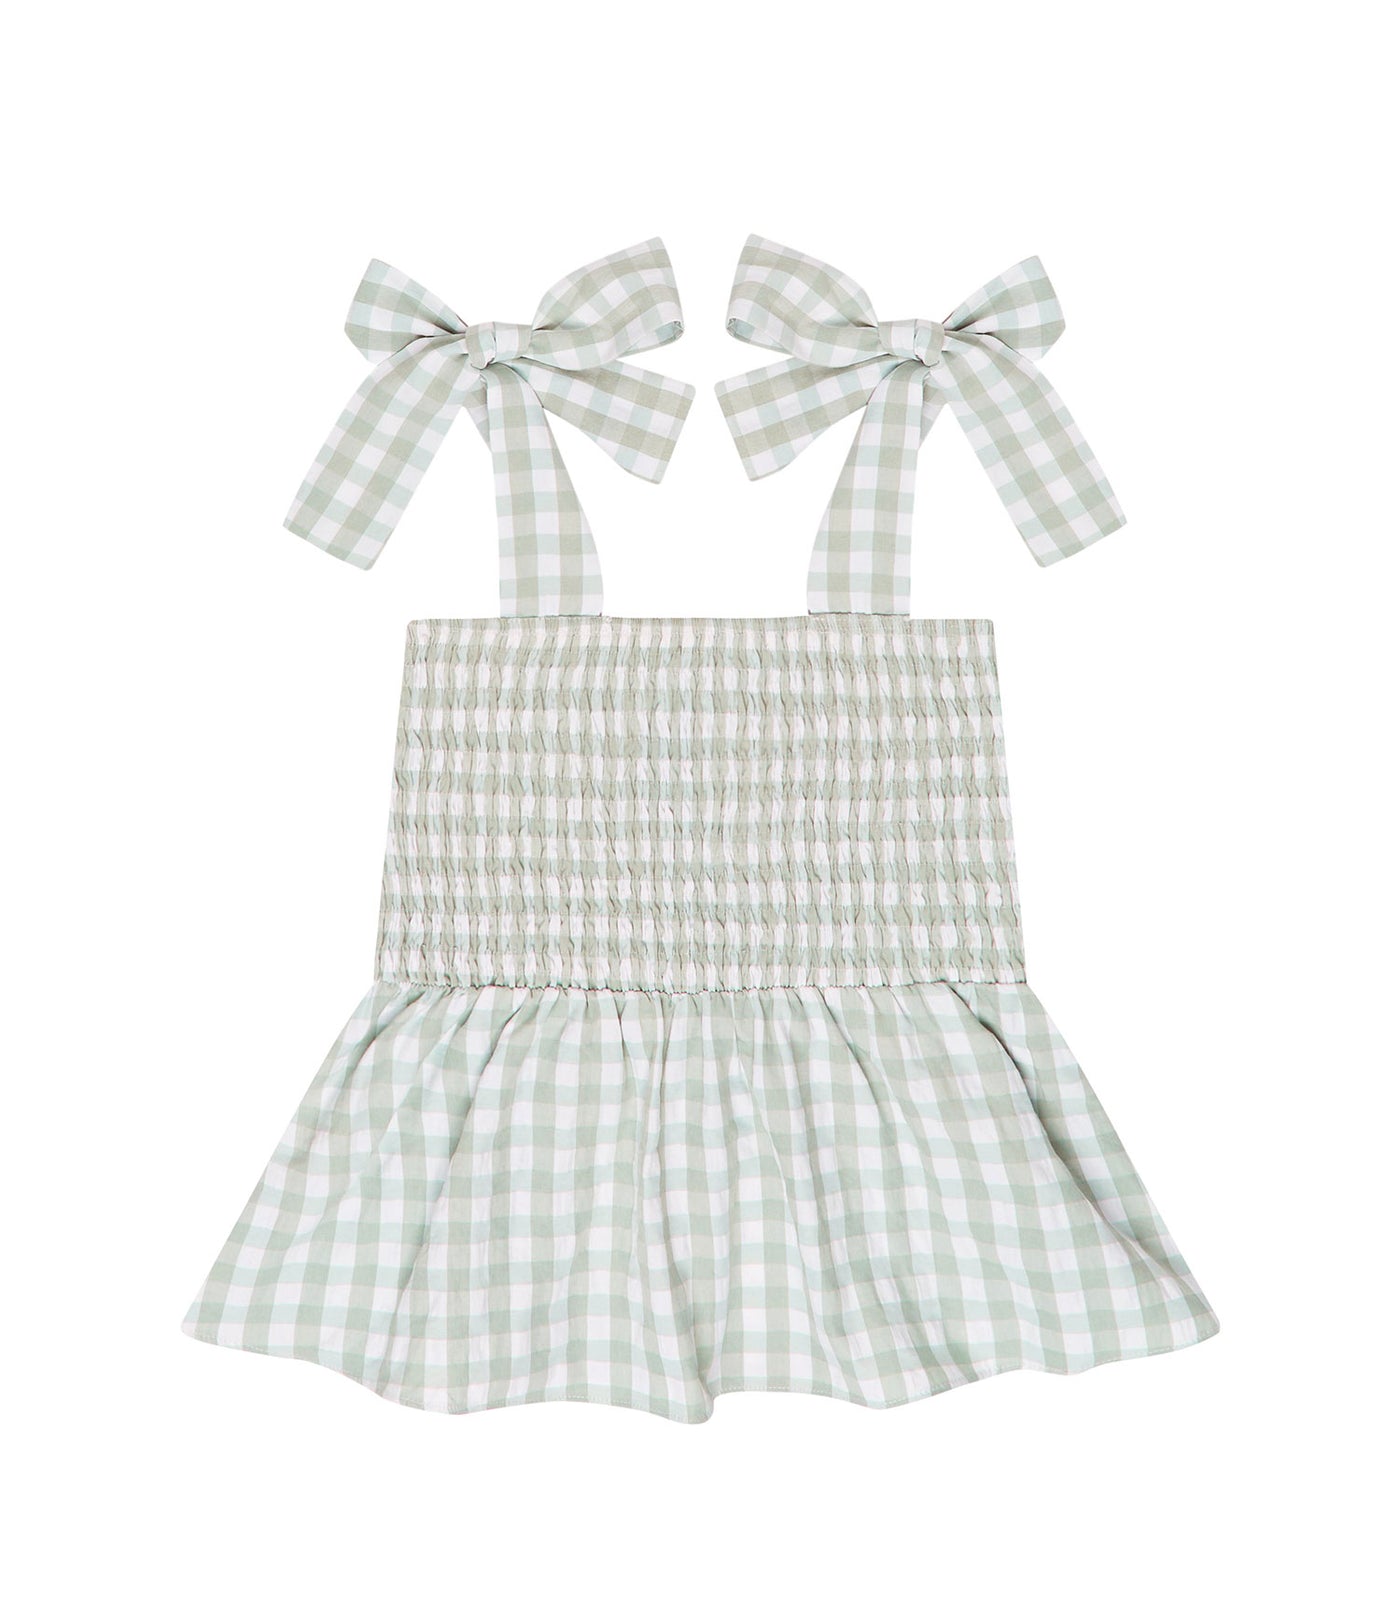 Green and white gingham top